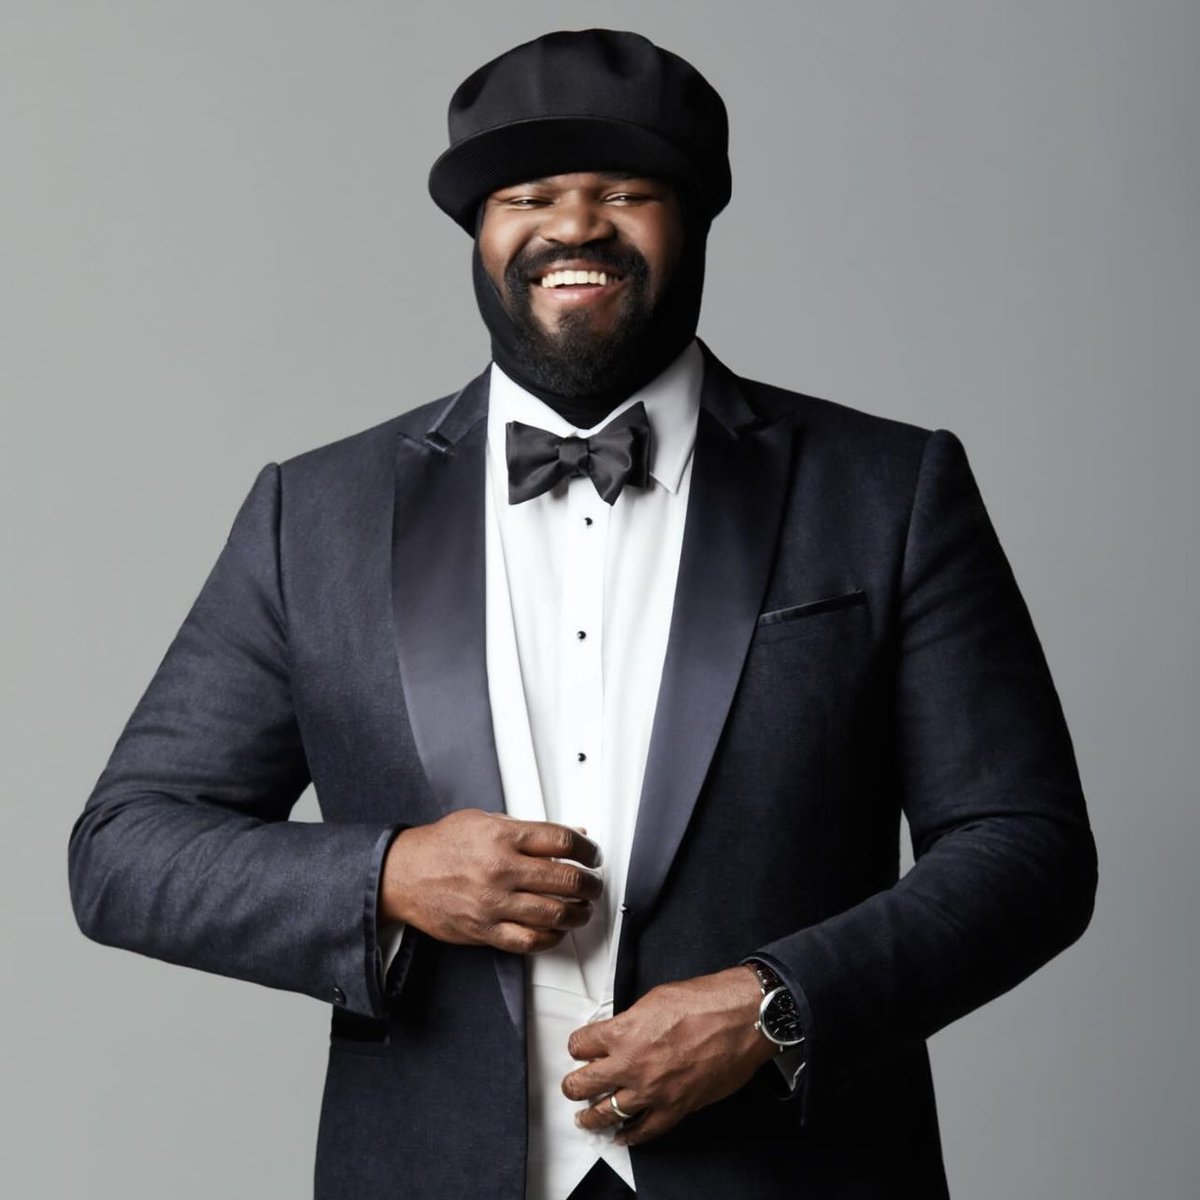 It's been so good to be back on the road! Lots of new show announcements will be coming soon. Make sure you check back here or my website tour page to see when I'll be performing near you. gregoryporter.com/tour/